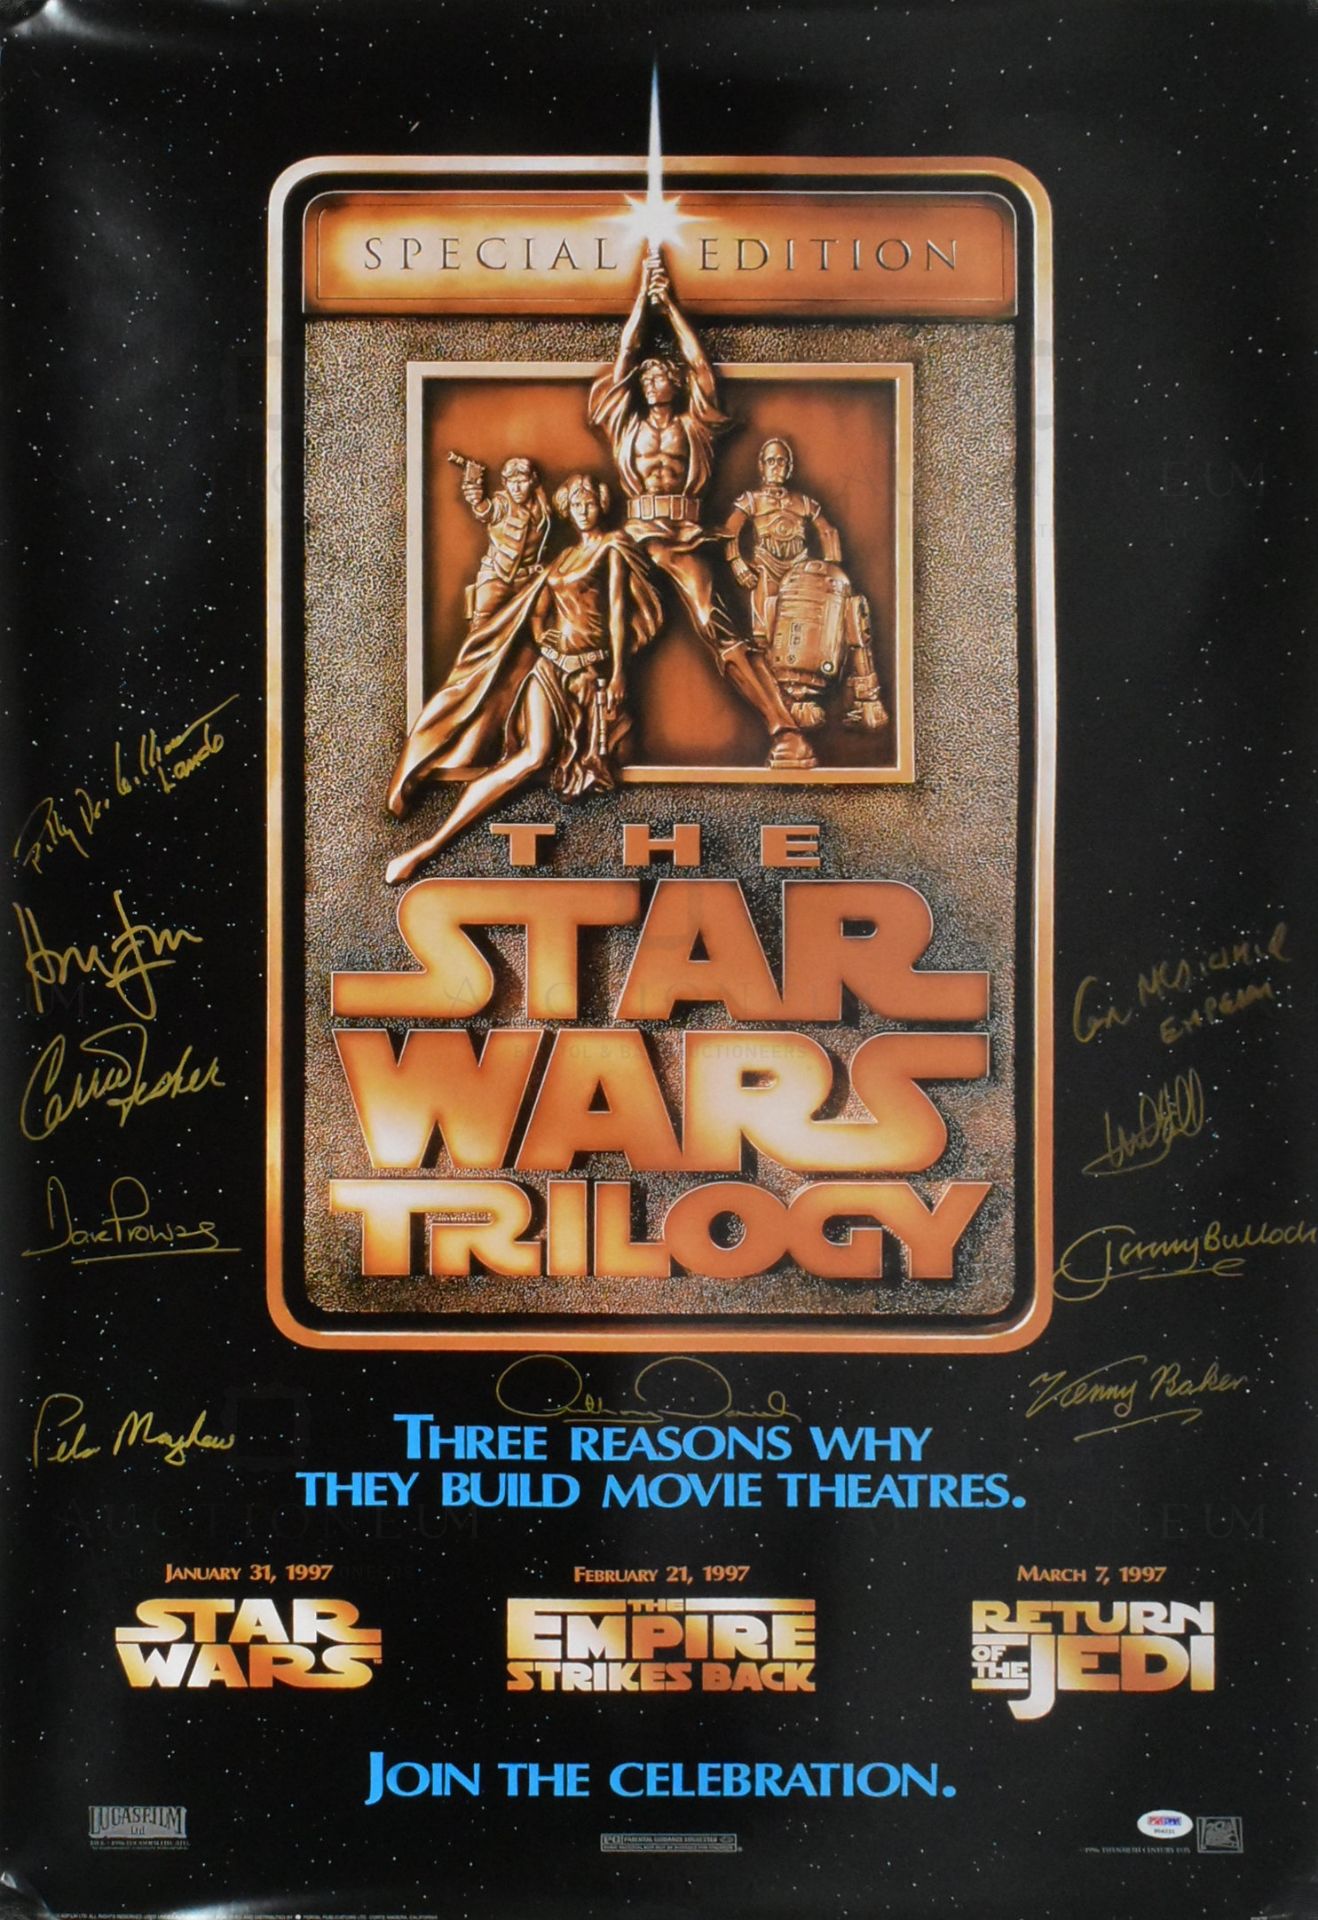 STAR WARS - SPECIAL EDITIONS - MAIN CAST SIGNED POSTER - PSA / DNA